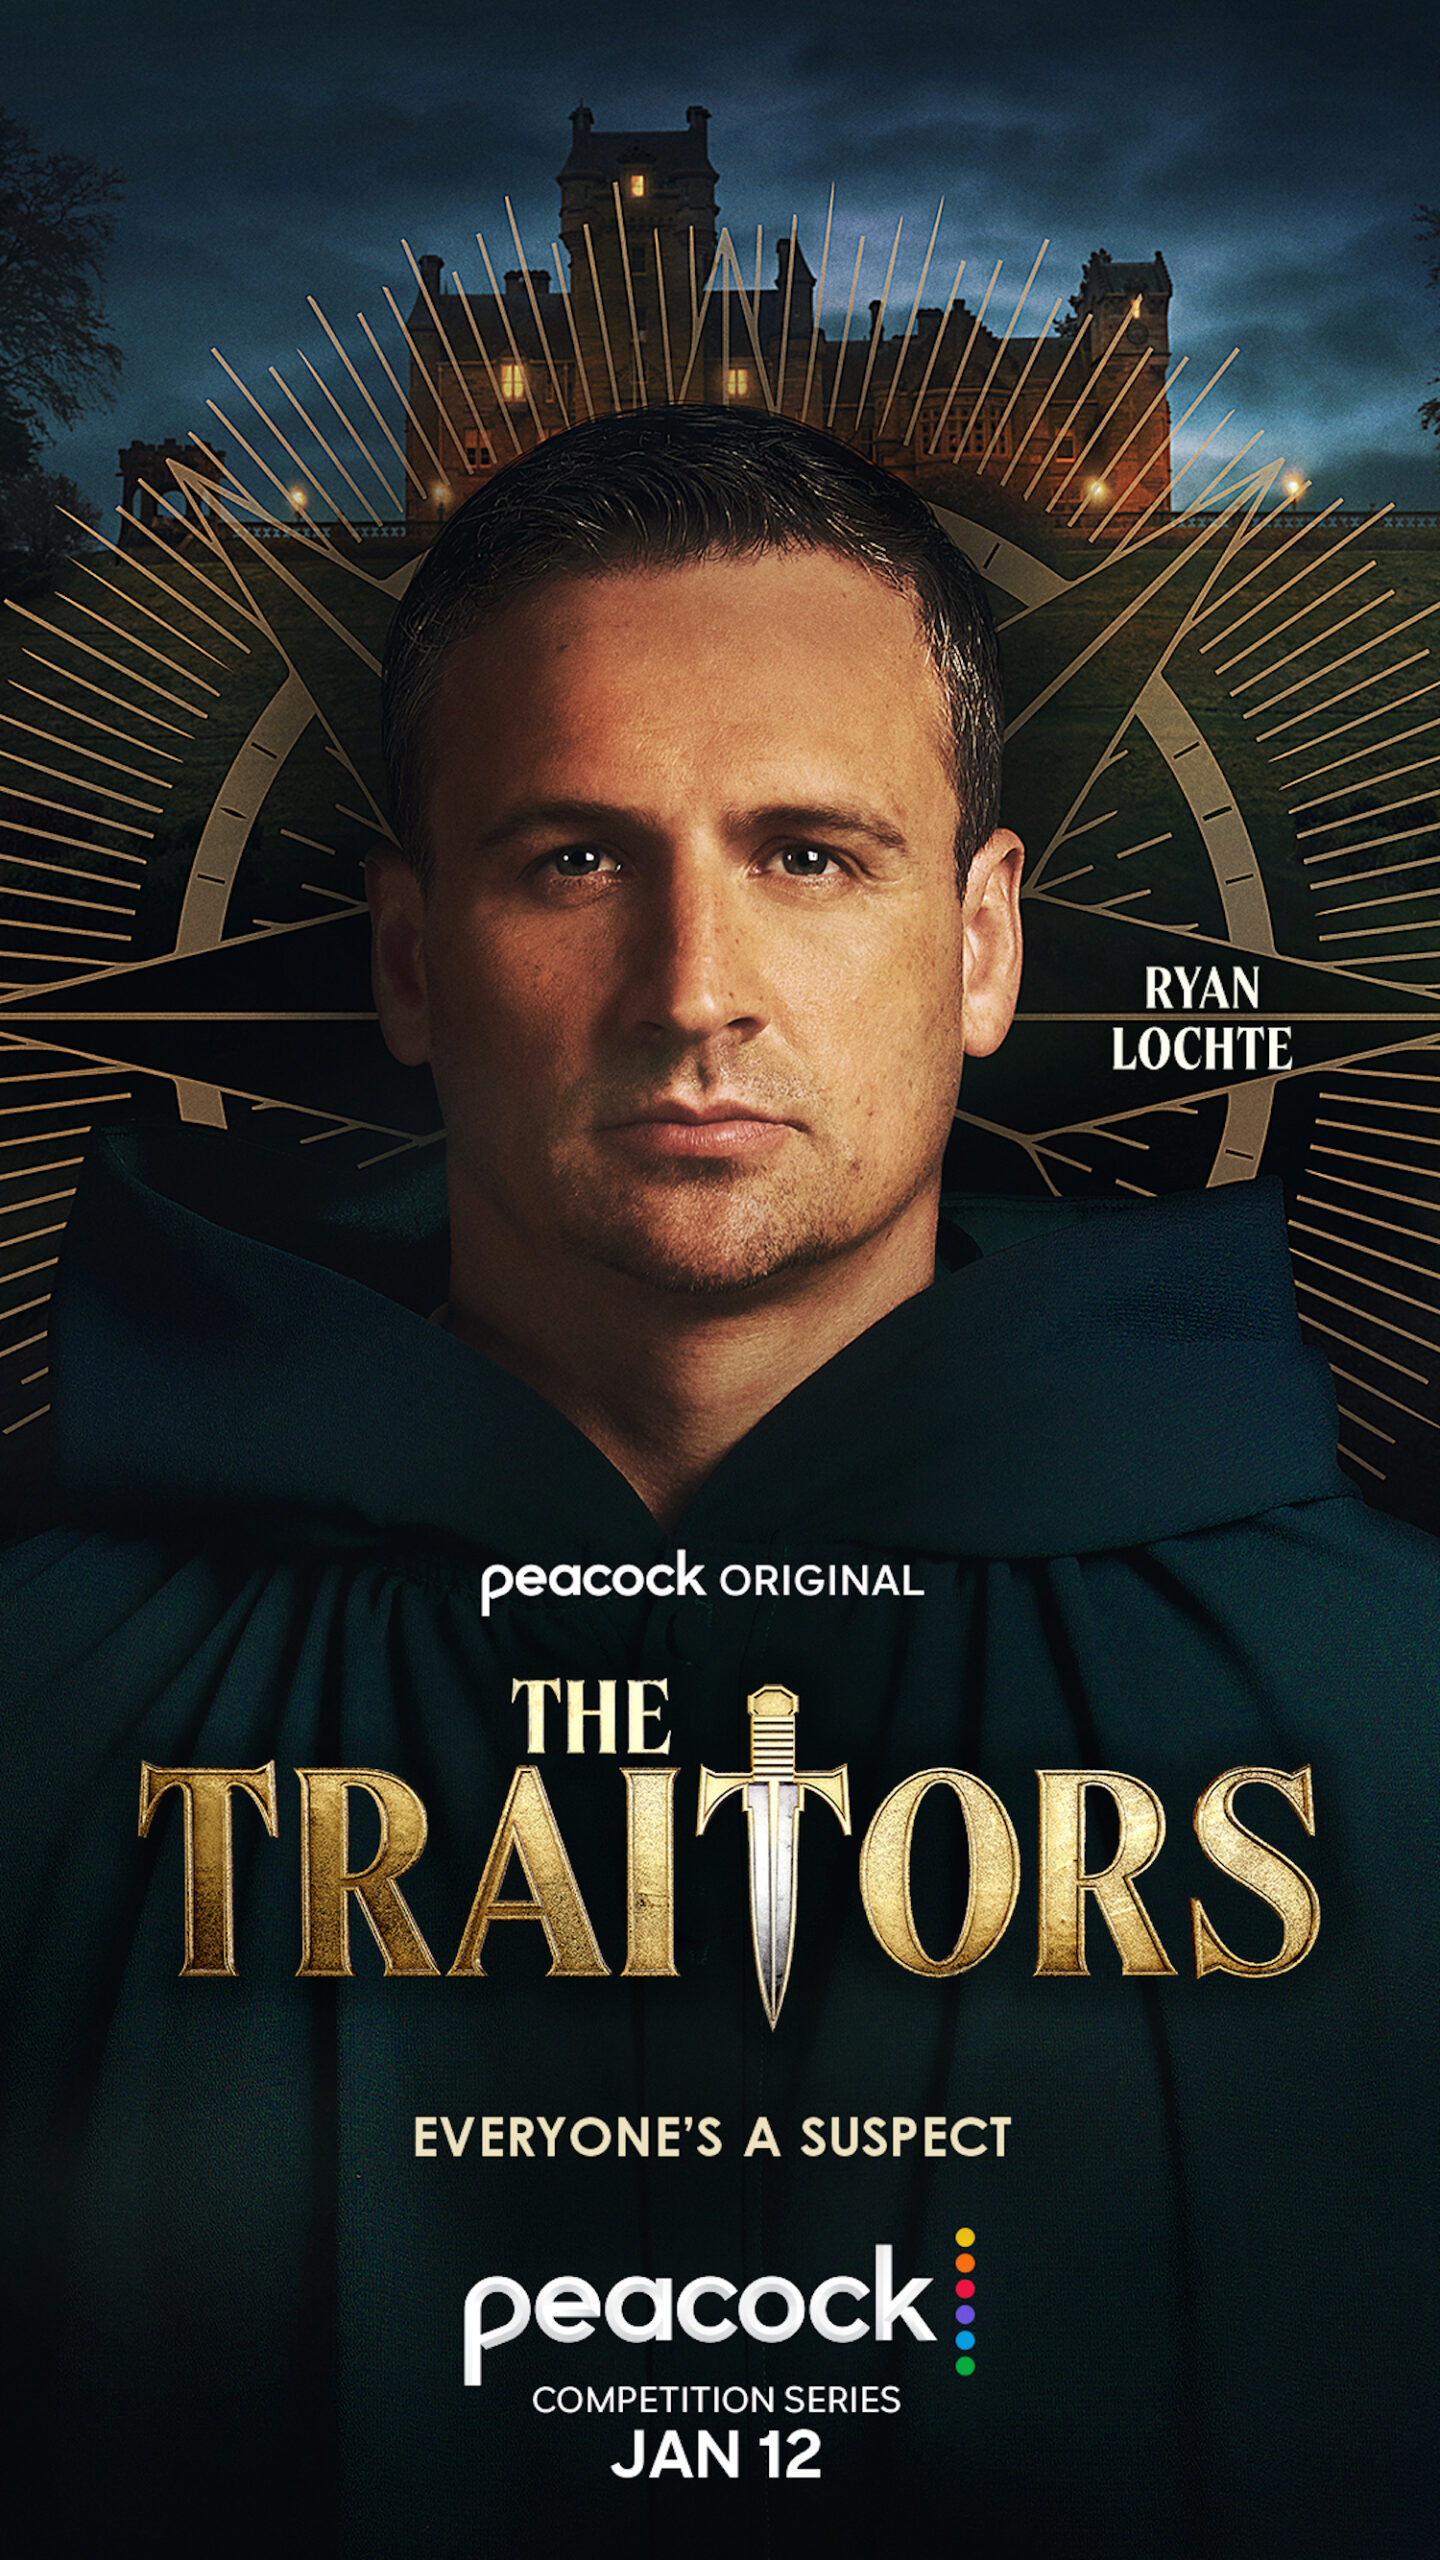 Ryan Lochte for 'The Traitors'